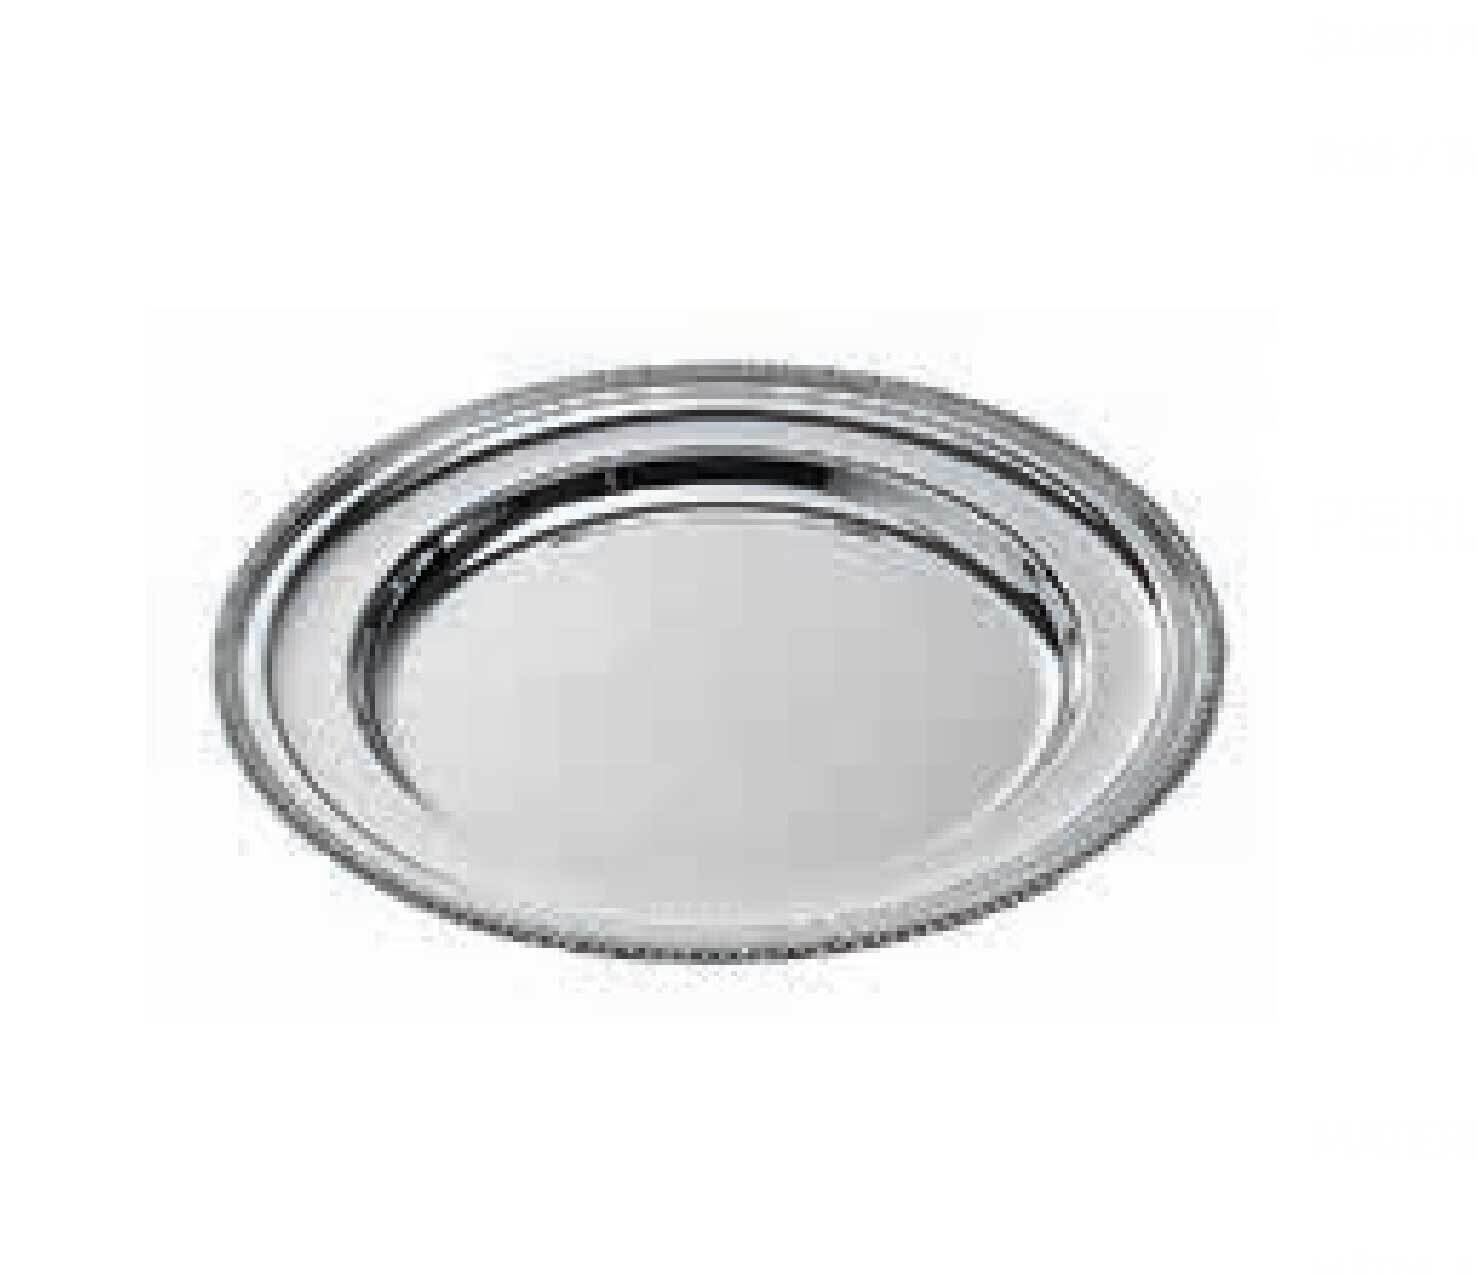 Ercuis Perles Round Dish 31.5 Inch Silver Plated F51P472-80